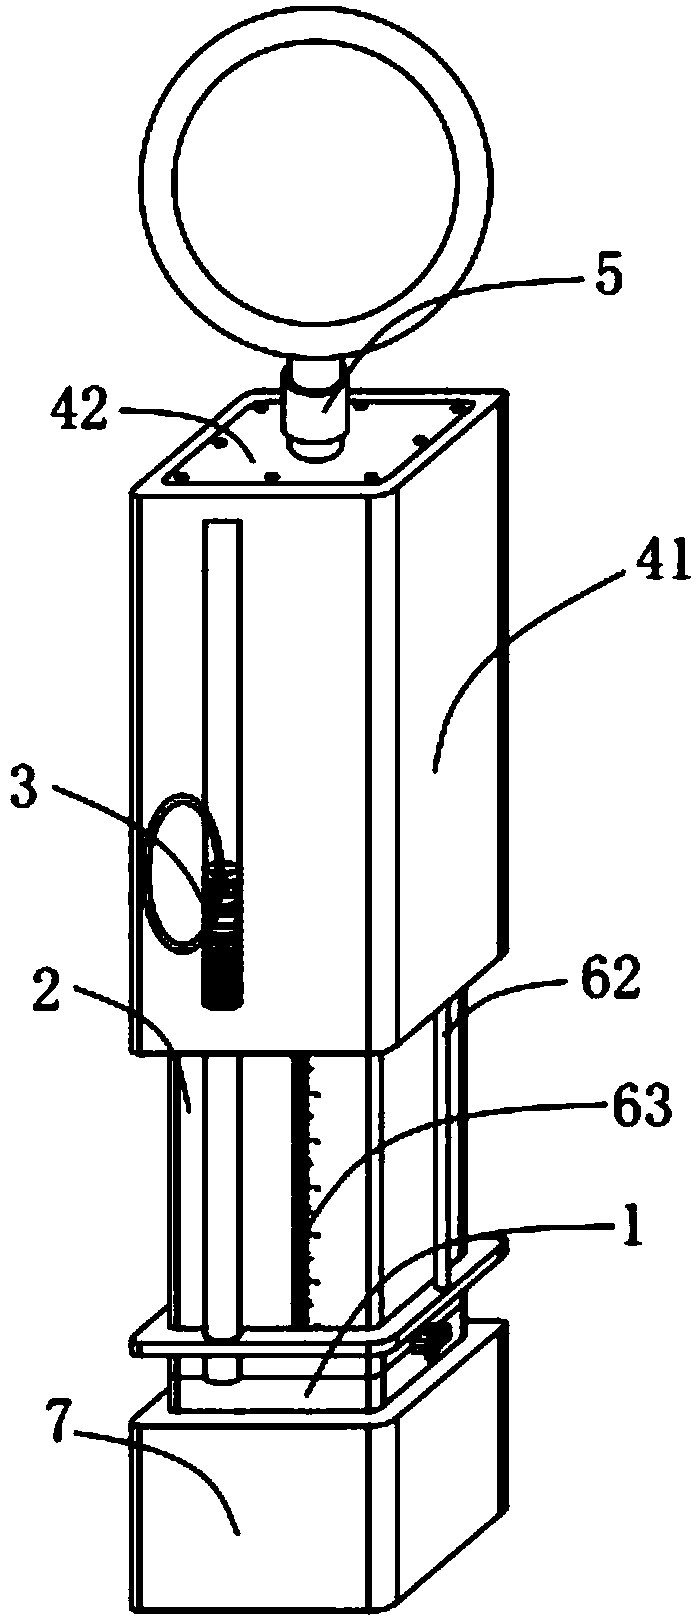 Method for performing anesthesia with lidocaine anesthetic